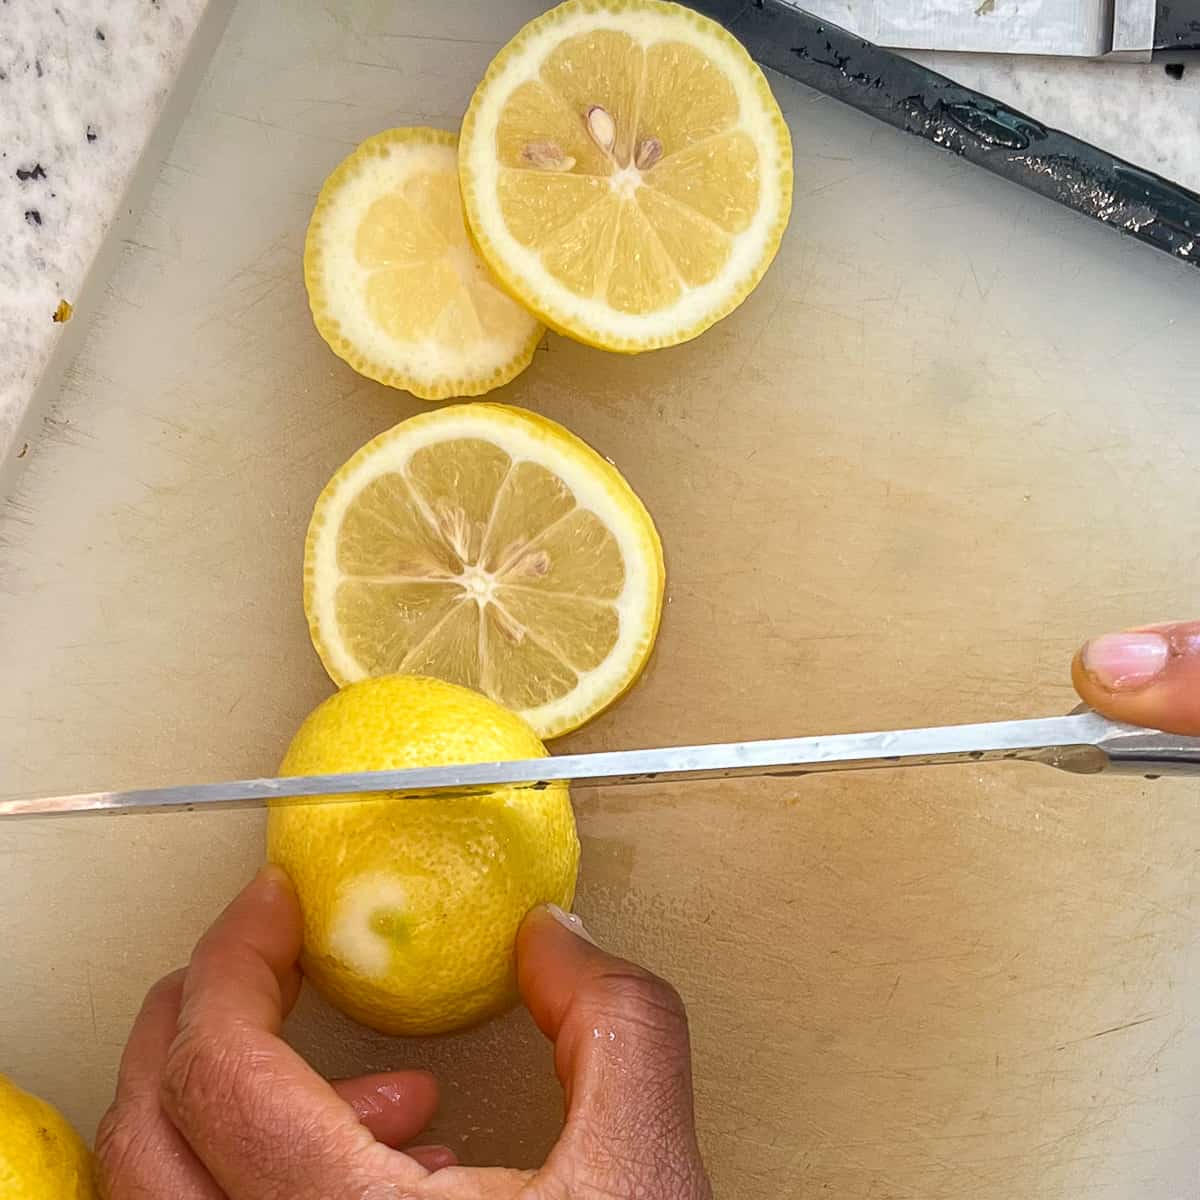 A woman's hand slicing lemons for the juicer.